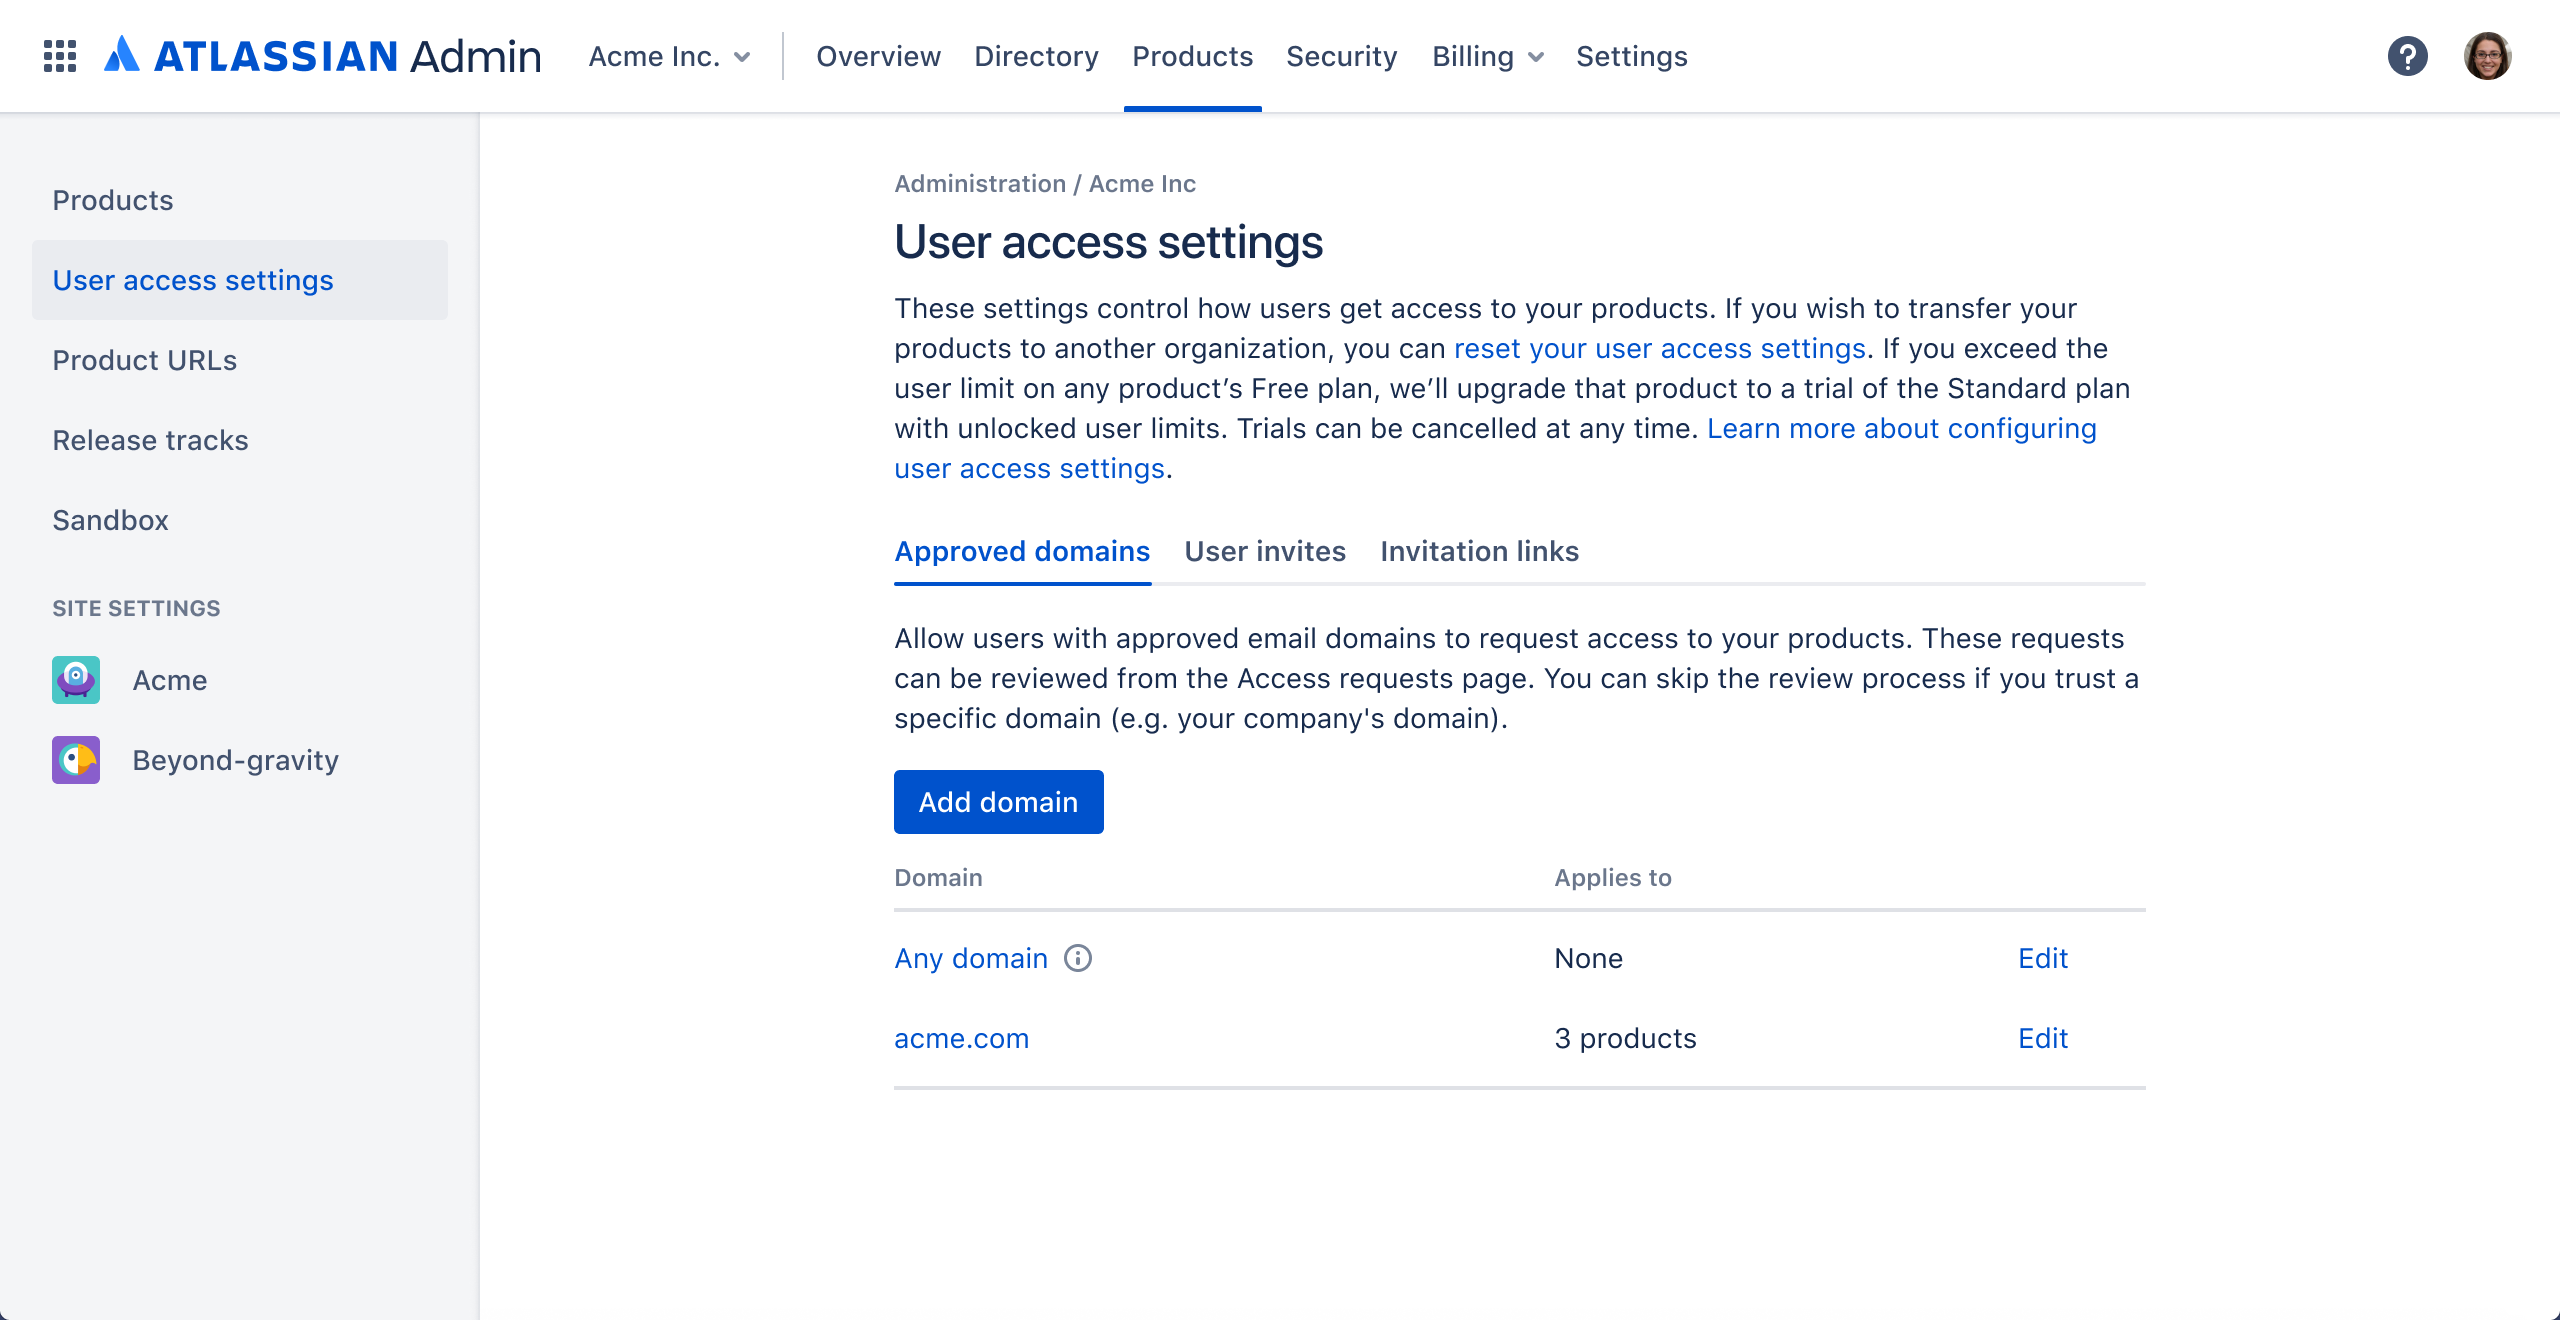 Product, User access settings, Approved domains